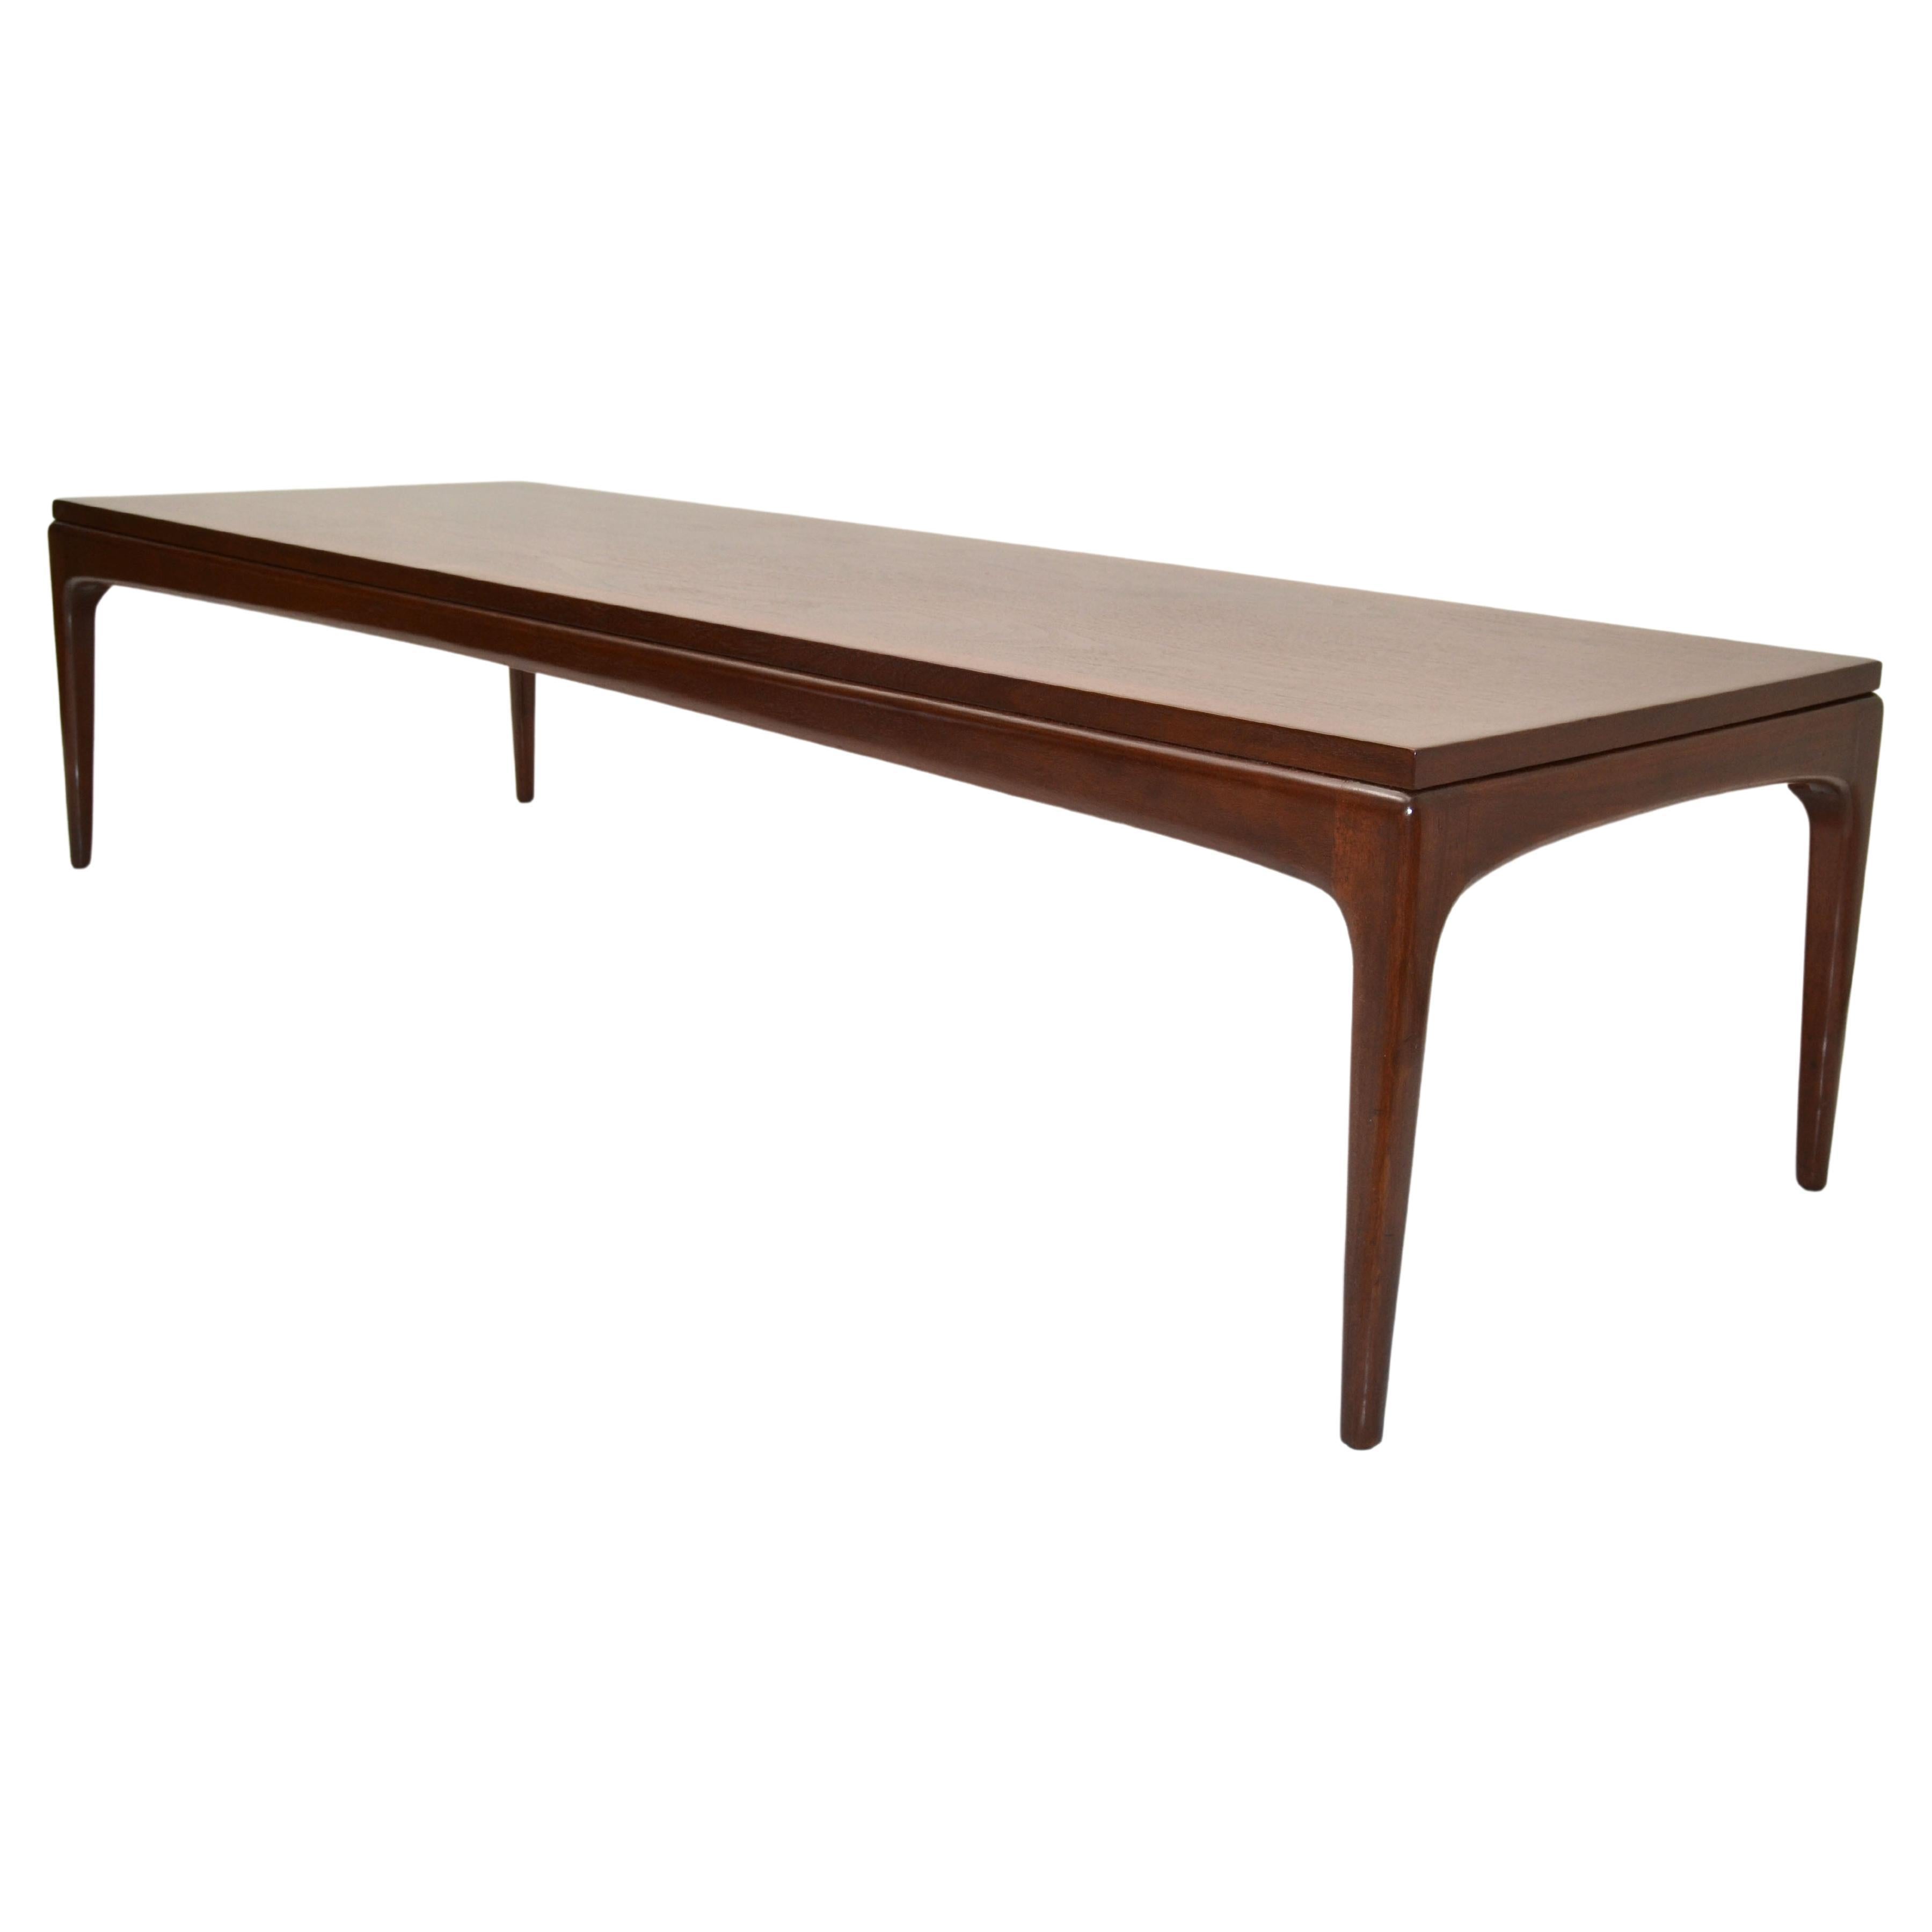 Gio Ponti Style Low Coffee Table Tapered Legs Walnut Mid-Century Modern Italy 70 For Sale